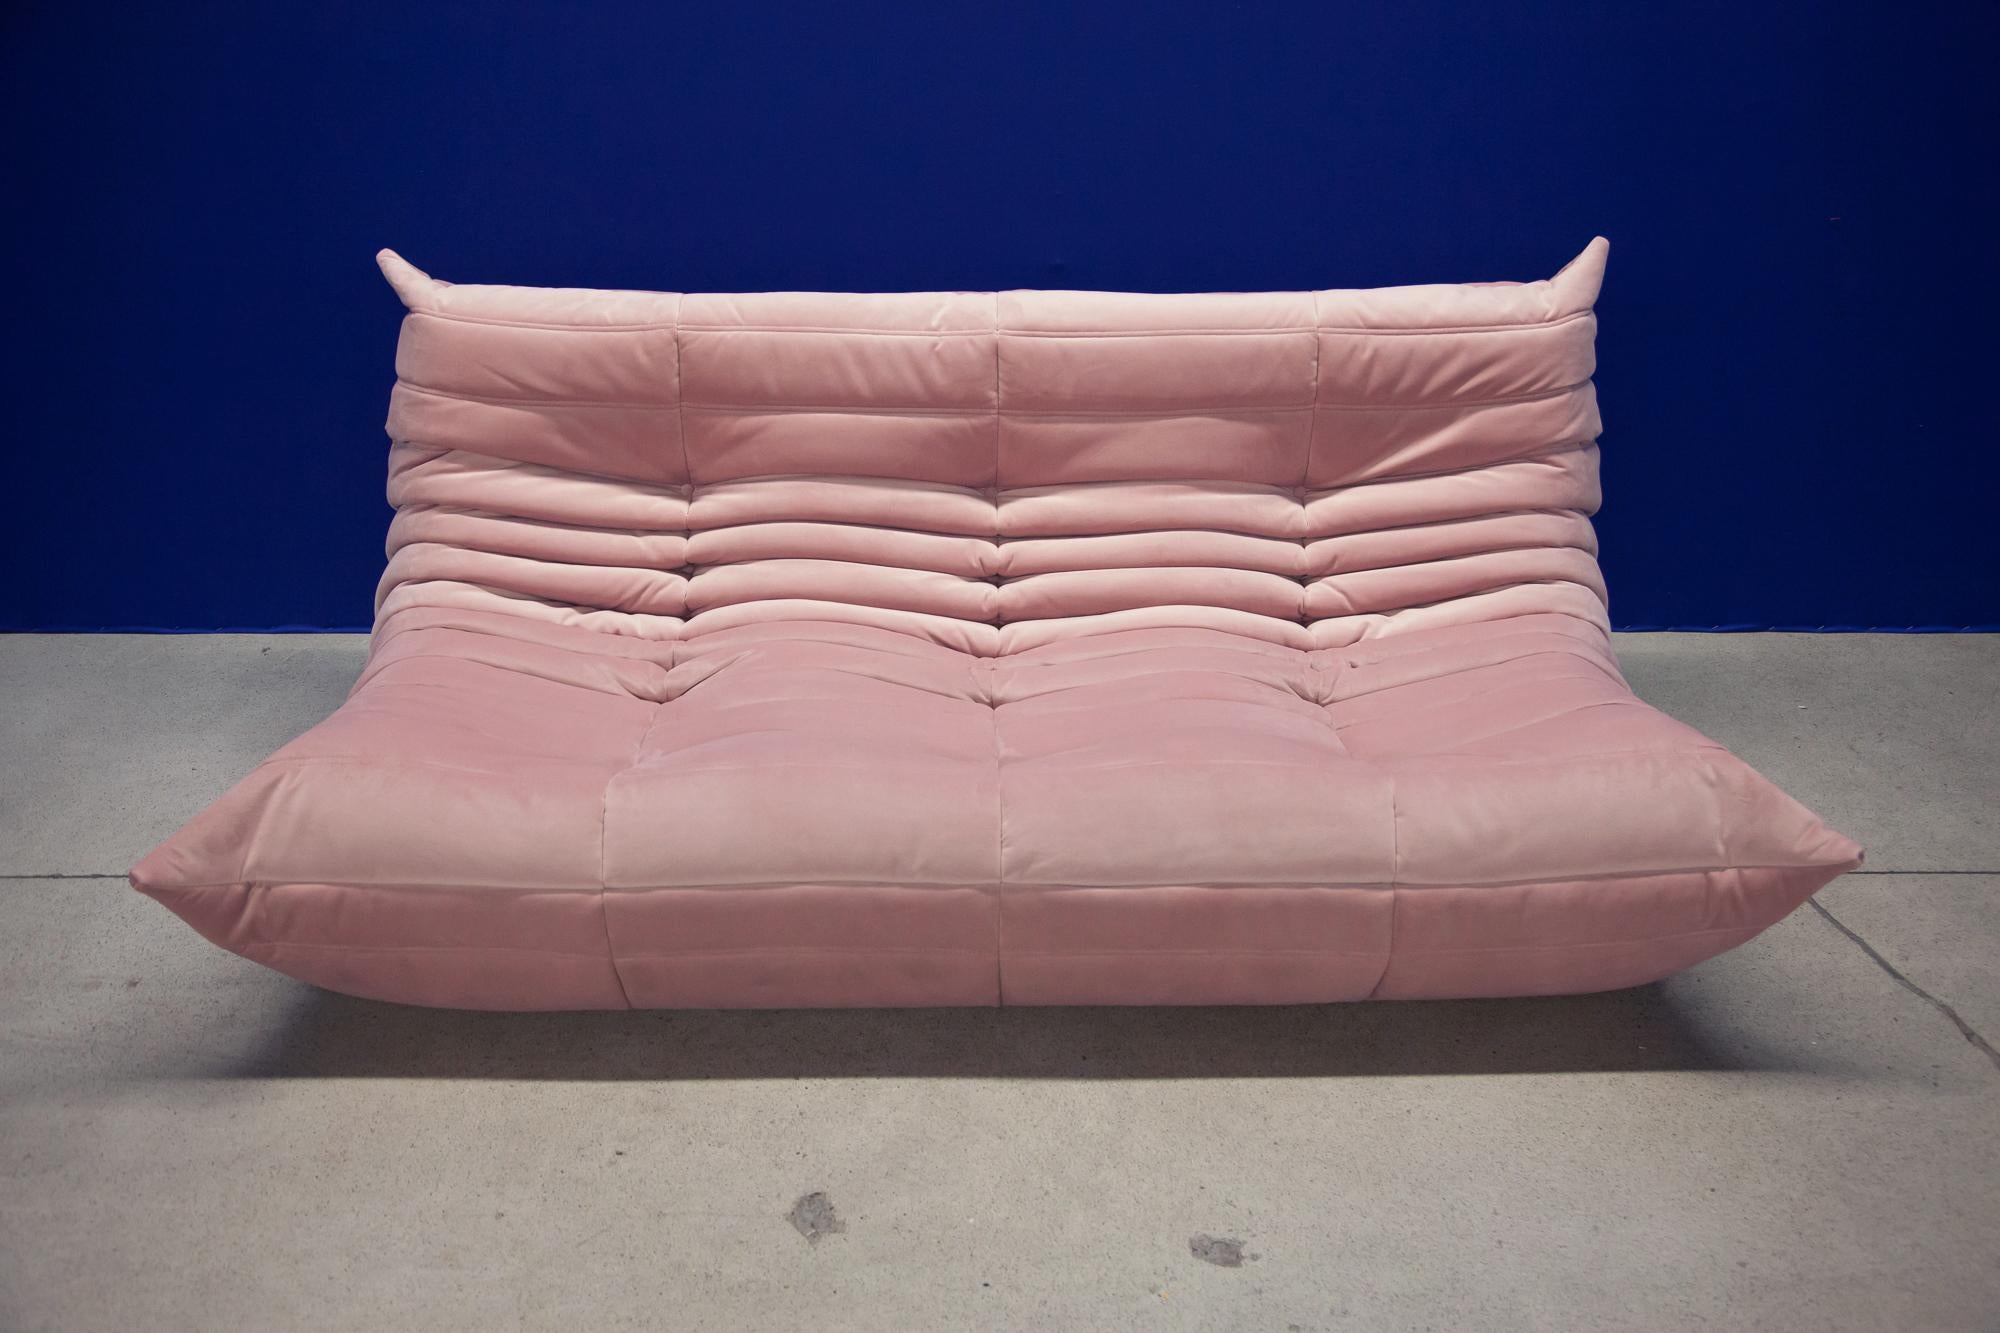 This Togo three-seat sofa was designed by Michel Ducaroy in 1973 and was manufactured by Ligne Roset in France. It has been reupholstered in new pink velvet (70 x 174 x 102 cm). It has the original Ligne Roset logo and genuine Ligne Roset bottom.